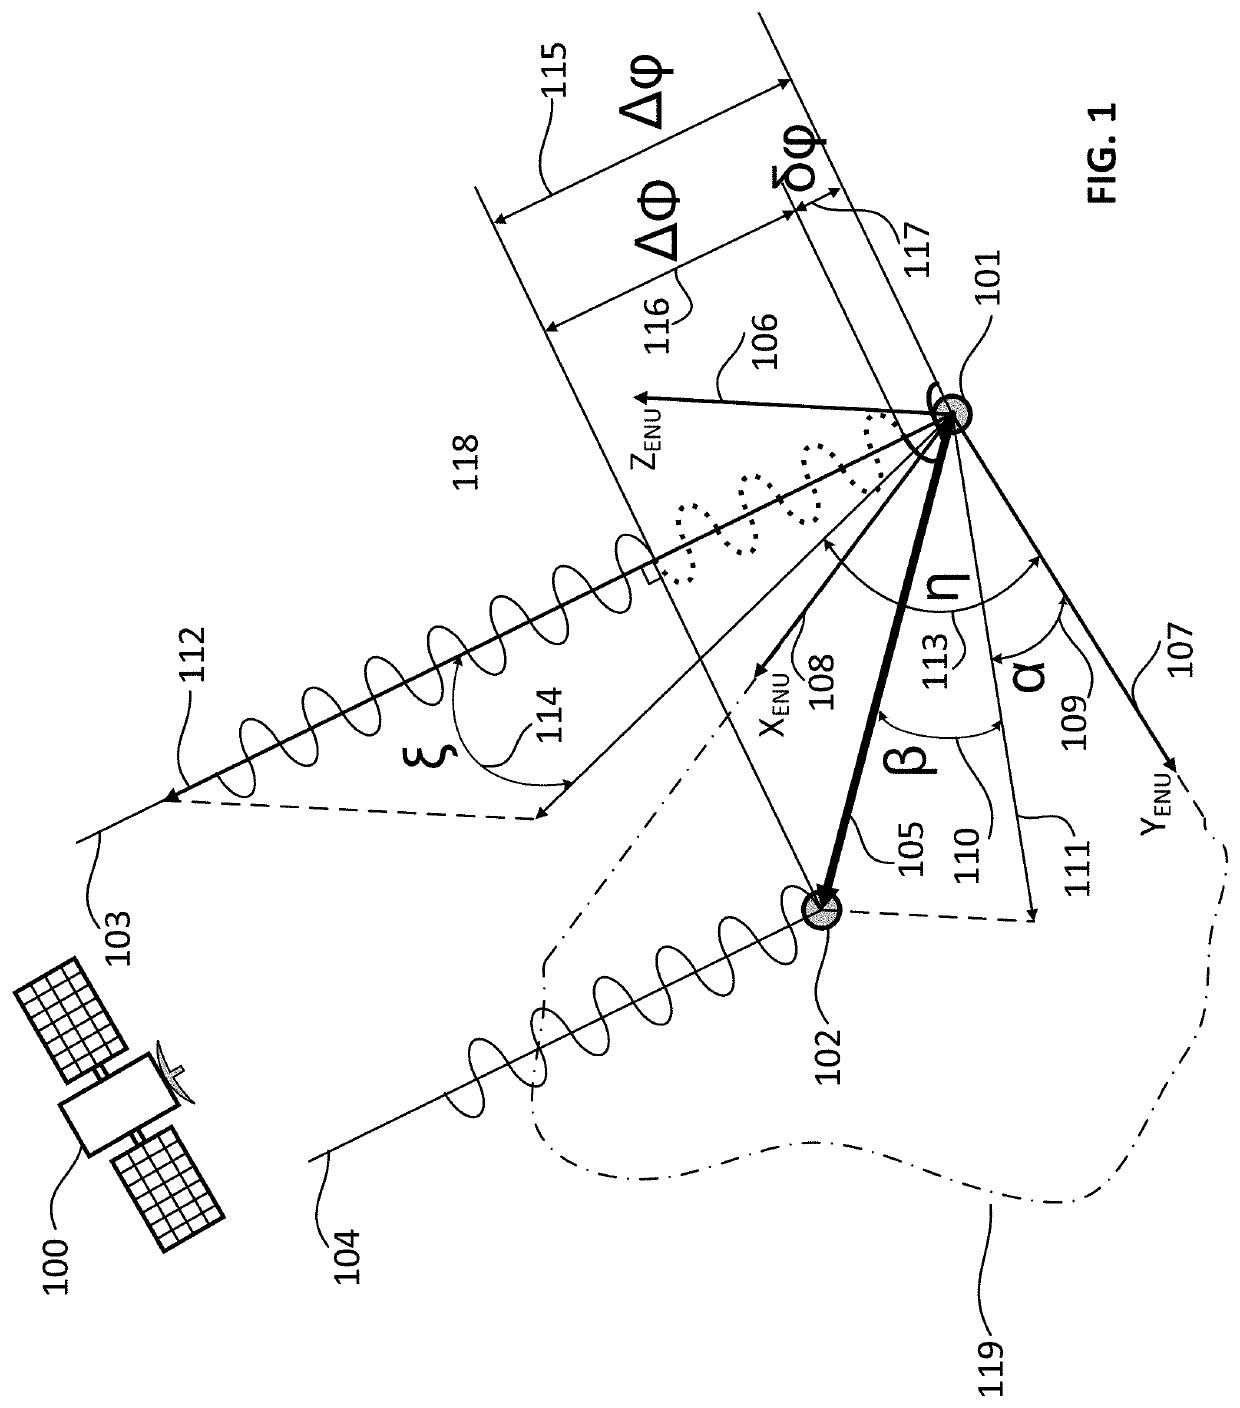 GNSS-based attitude determination algorithm and triple-antenna GNSS receiver for its implementation